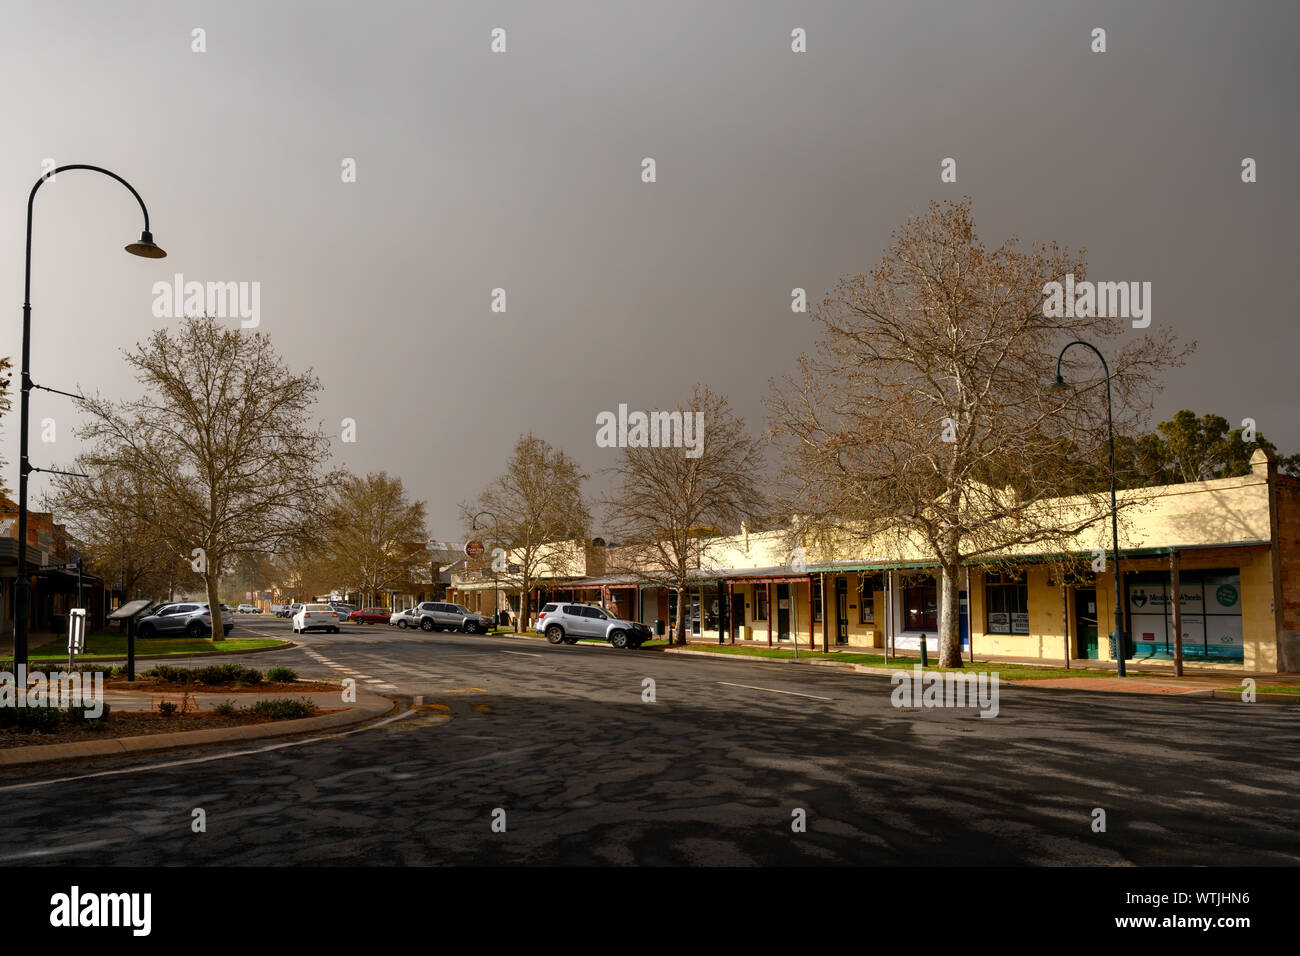 Late light on buildings in the main street of a small rural town in Australia. Just after a small shower of rain on an otherwise very dusty day. Stock Photo